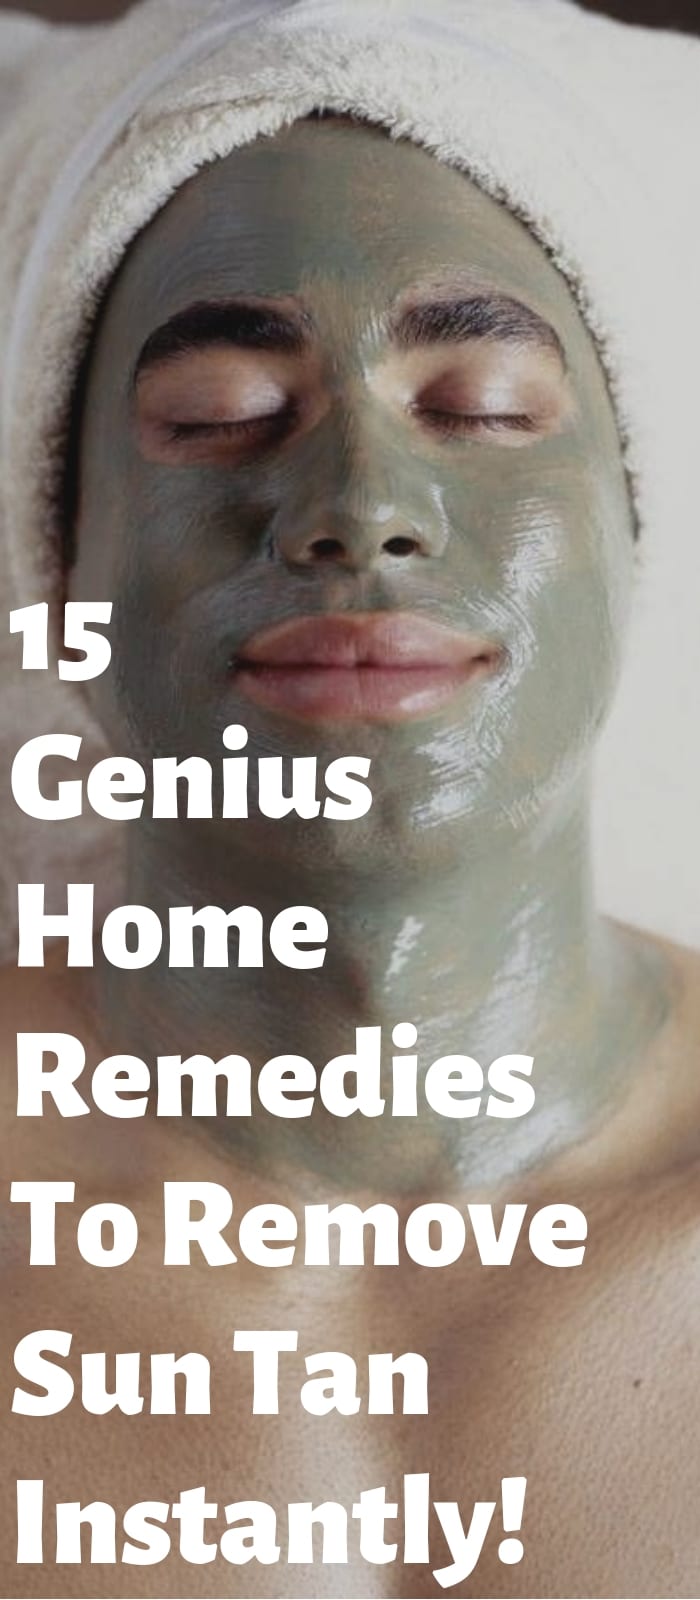 15 Genius Home Remedies To Remove Sun Tan Instantly!